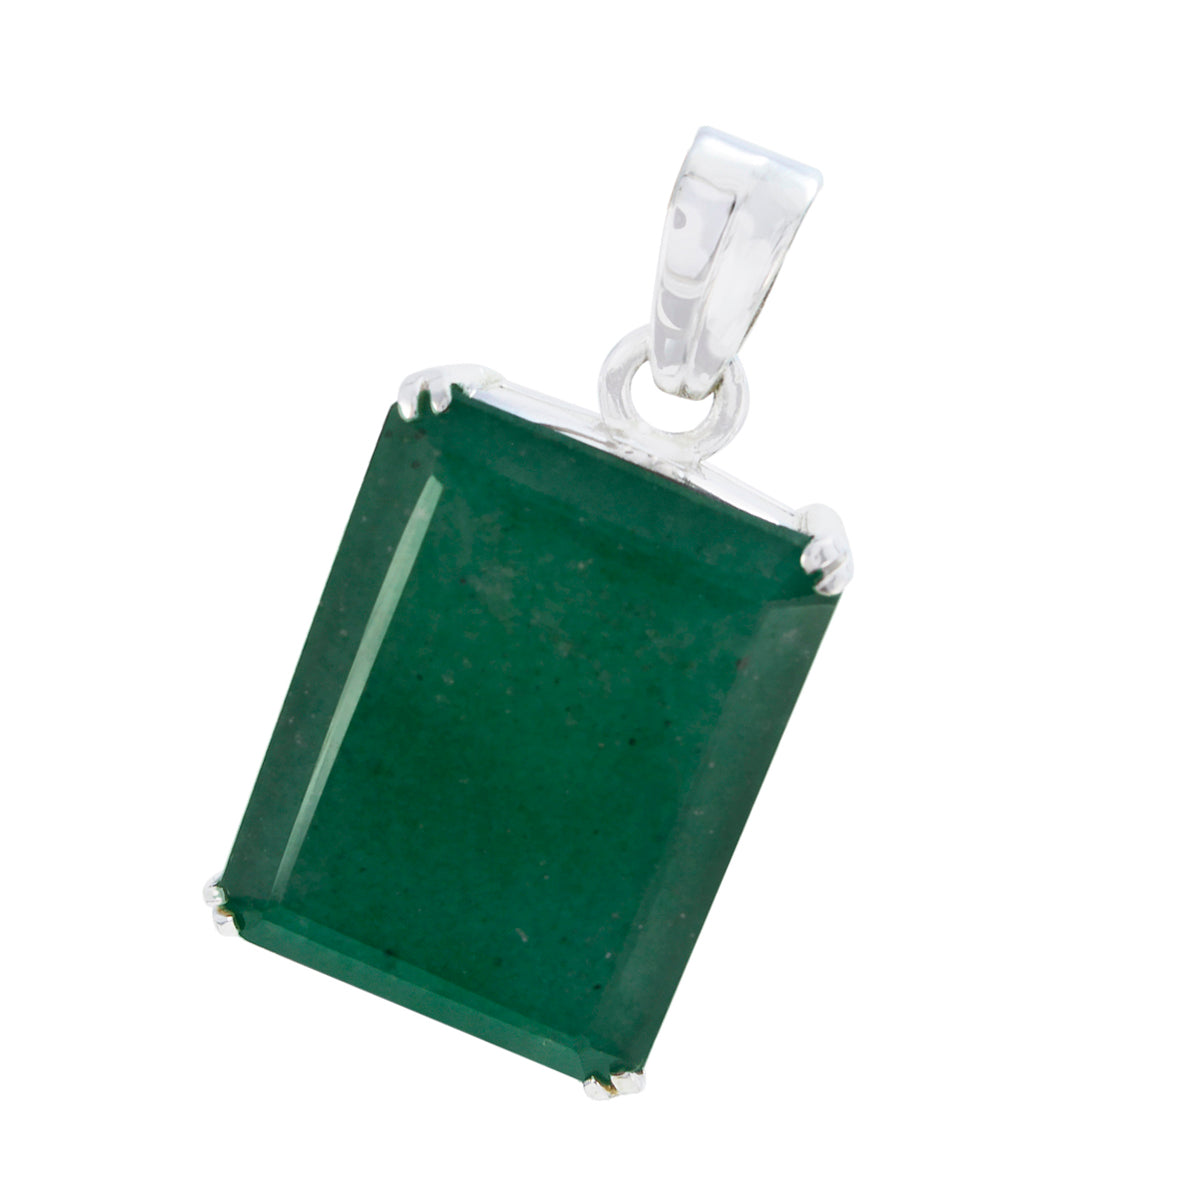 Riyo Pretty Gemstone Octagon Faceted Green Indian Emerald 961 Sterling Silver Pendant Gift For Birthday